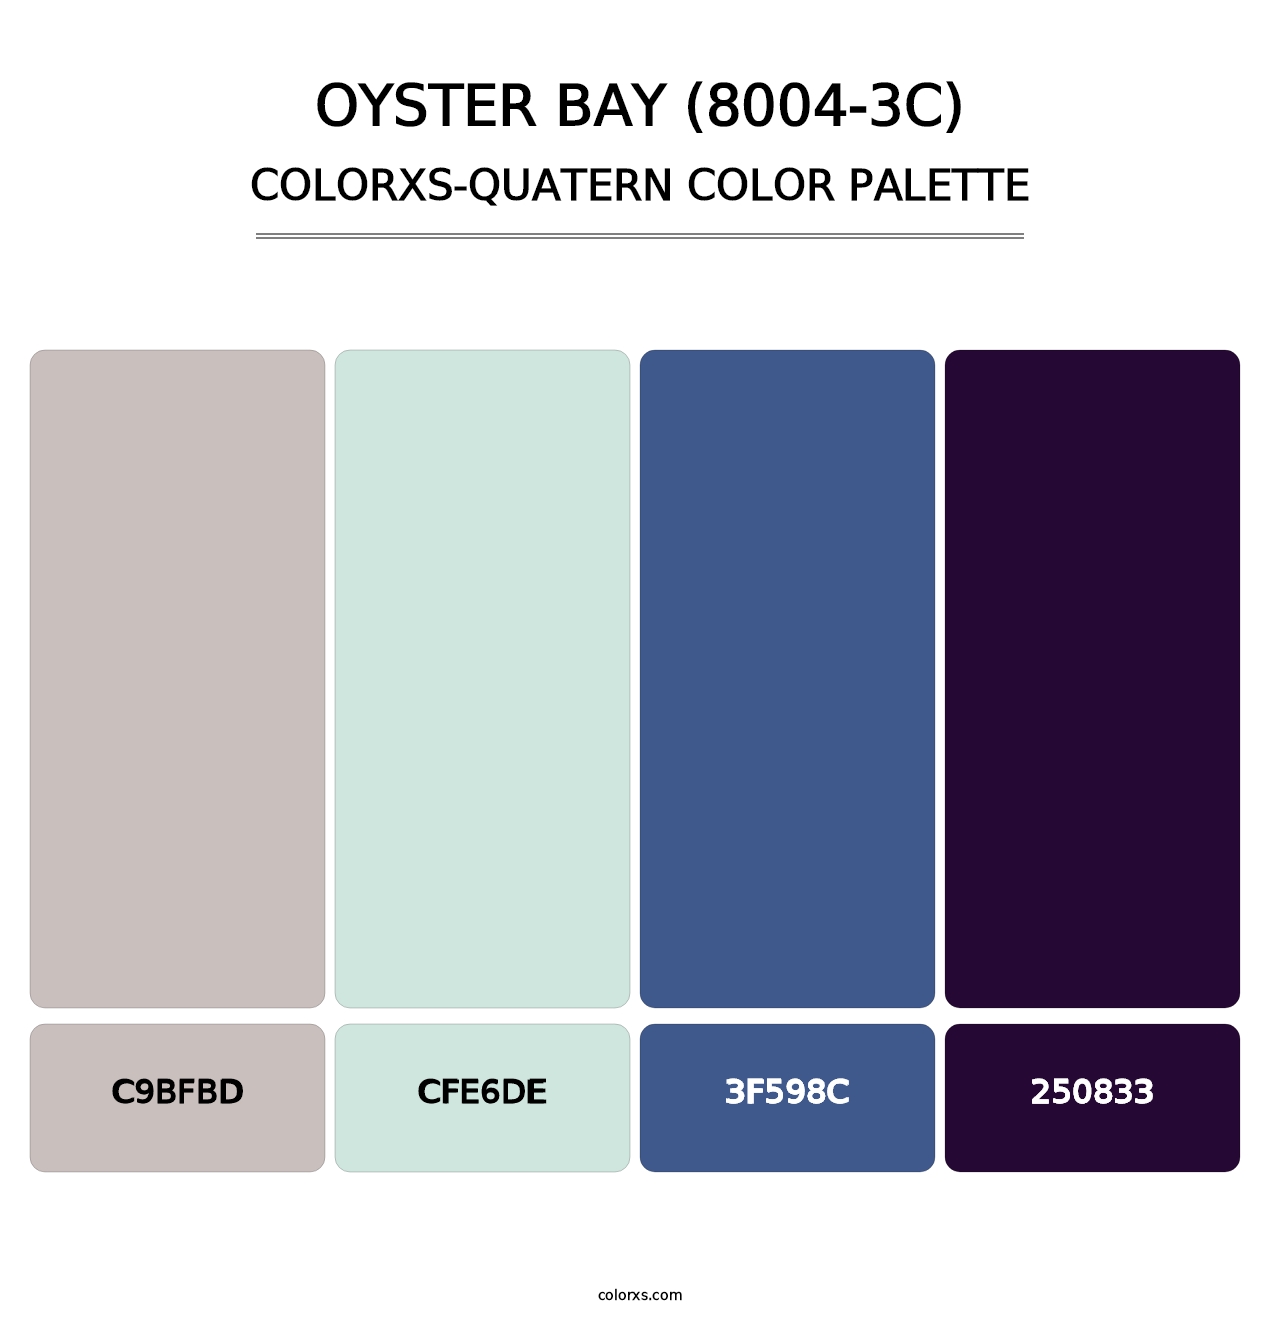 Oyster Bay (8004-3C) - Colorxs Quatern Palette